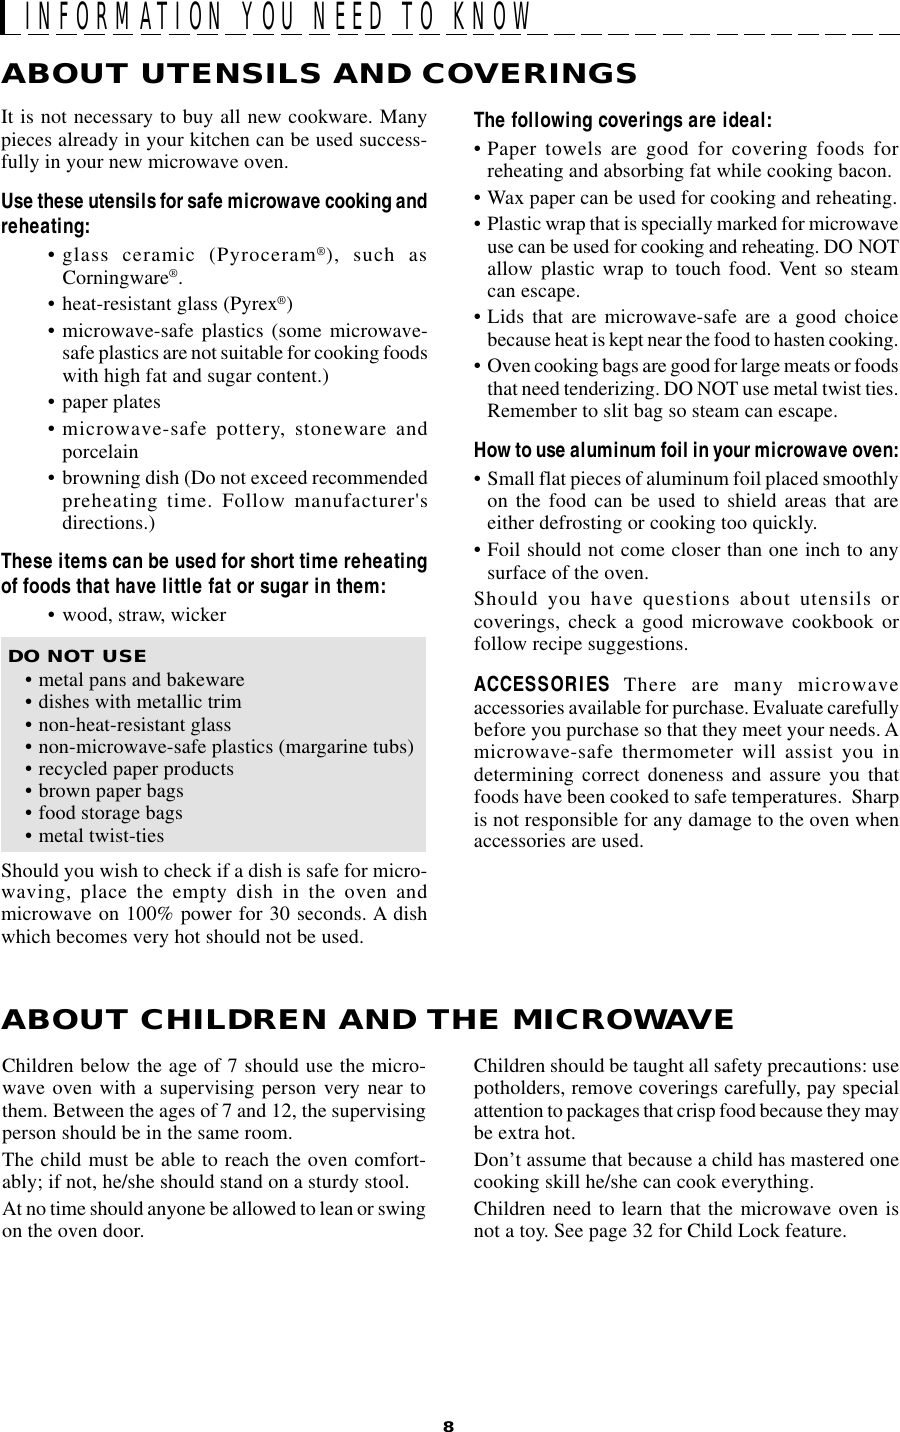 8INFORMATION YOU NEED TO KNOWABOUT UTENSILS AND COVERINGSChildren below the age of 7 should use the micro-wave oven with a supervising person very near tothem. Between the ages of 7 and 12, the supervisingperson should be in the same room.The child must be able to reach the oven comfort-ably; if not, he/she should stand on a sturdy stool.At no time should anyone be allowed to lean or swingon the oven door.ABOUT CHILDREN AND THE MICROWAVEChildren should be taught all safety precautions: usepotholders, remove coverings carefully, pay specialattention to packages that crisp food because they maybe extra hot.Don’t assume that because a child has mastered onecooking skill he/she can cook everything.Children need to learn that the microwave oven isnot a toy. See page 32 for Child Lock feature.The following coverings are ideal:• Paper towels are good for covering foods forreheating and absorbing fat while cooking bacon.• Wax paper can be used for cooking and reheating.• Plastic wrap that is specially marked for microwaveuse can be used for cooking and reheating. DO NOTallow plastic wrap to touch food. Vent so steamcan escape.• Lids that are microwave-safe are a good choicebecause heat is kept near the food to hasten cooking.• Oven cooking bags are good for large meats or foodsthat need tenderizing. DO NOT use metal twist ties.Remember to slit bag so steam can escape.How to use aluminum foil in your microwave oven:• Small flat pieces of aluminum foil placed smoothlyon the food can be used to shield areas that areeither defrosting or cooking too quickly.• Foil should not come closer than one inch to anysurface of the oven.Should you have questions about utensils orcoverings, check a good microwave cookbook orfollow recipe suggestions.ACCESSORIES There are many microwaveaccessories available for purchase. Evaluate carefullybefore you purchase so that they meet your needs. Amicrowave-safe thermometer will assist you indetermining correct doneness and assure you thatfoods have been cooked to safe temperatures.  Sharpis not responsible for any damage to the oven whenaccessories are used.It is not necessary to buy all new cookware. Manypieces already in your kitchen can be used success-fully in your new microwave oven.Use these utensils for safe microwave cooking andreheating:• glass ceramic (Pyroceram®), such asCorningware®.• heat-resistant glass (Pyrex®)• microwave-safe plastics (some microwave-safe plastics are not suitable for cooking foodswith high fat and sugar content.)• paper plates• microwave-safe pottery, stoneware andporcelain• browning dish (Do not exceed recommendedpreheating time. Follow manufacturer&apos;sdirections.)These items can be used for short time reheatingof foods that have little fat or sugar in them:• wood, straw, wicker DO NOT USE• metal pans and bakeware• dishes with metallic trim• non-heat-resistant glass• non-microwave-safe plastics (margarine tubs)• recycled paper products• brown paper bags• food storage bags• metal twist-tiesShould you wish to check if a dish is safe for micro-waving, place the empty dish in the oven andmicrowave on 100% power for 30 seconds. A dishwhich becomes very hot should not be used.